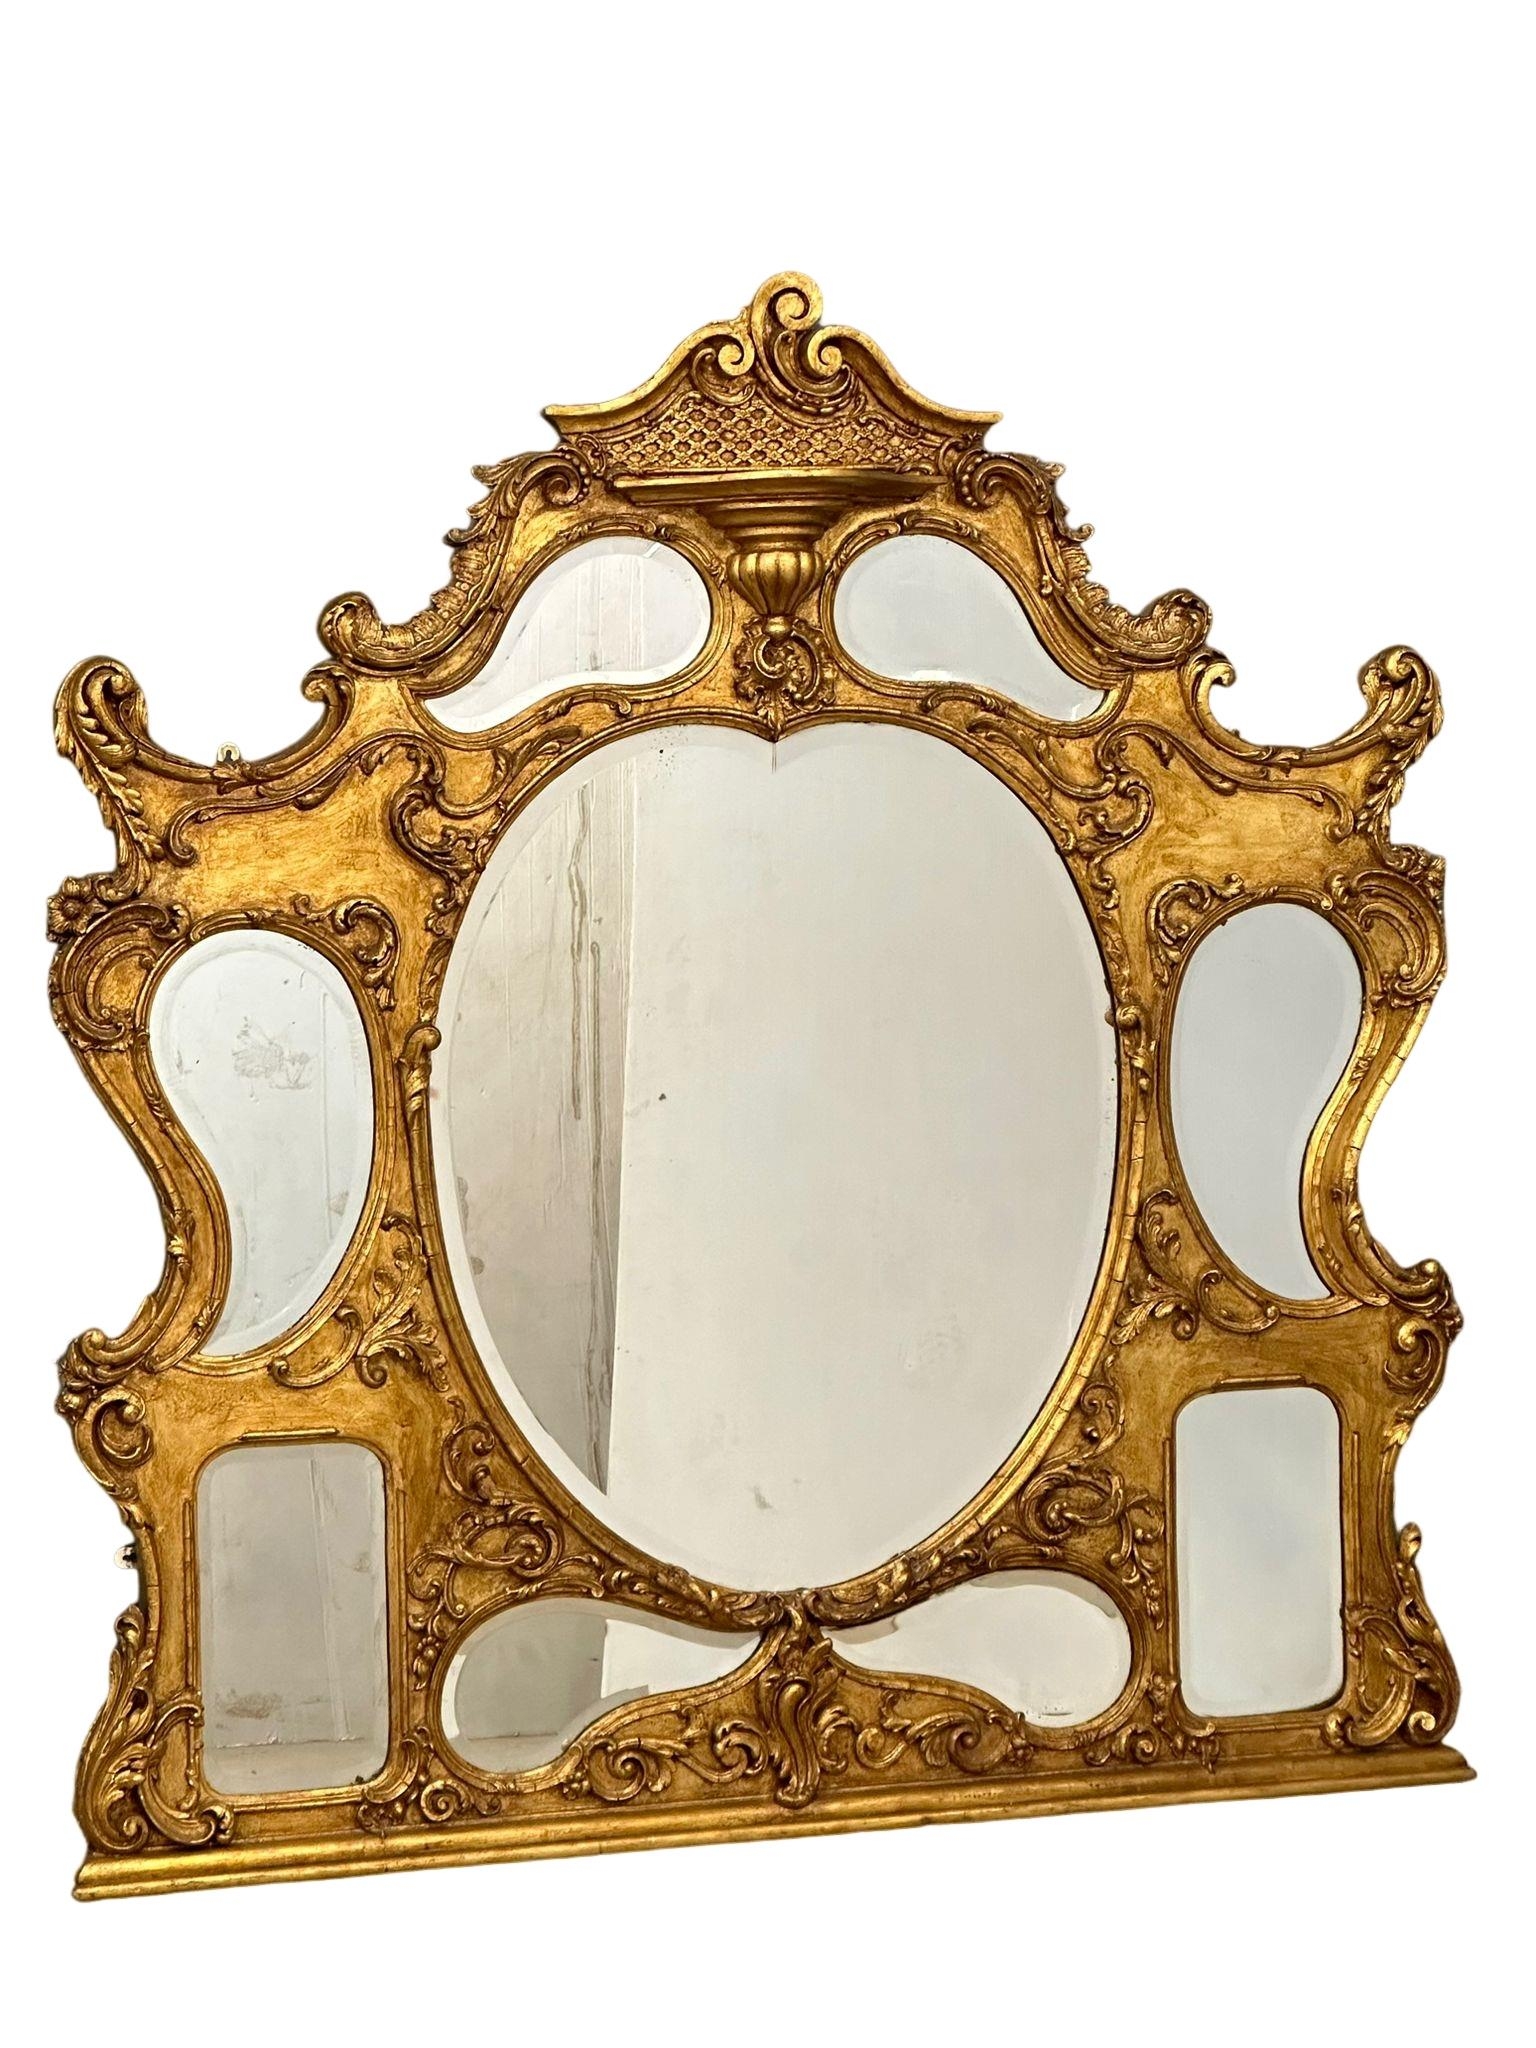 A large Early/Mid 19th Century Rococo gilt framed over-mantle mirror. 140x147cm